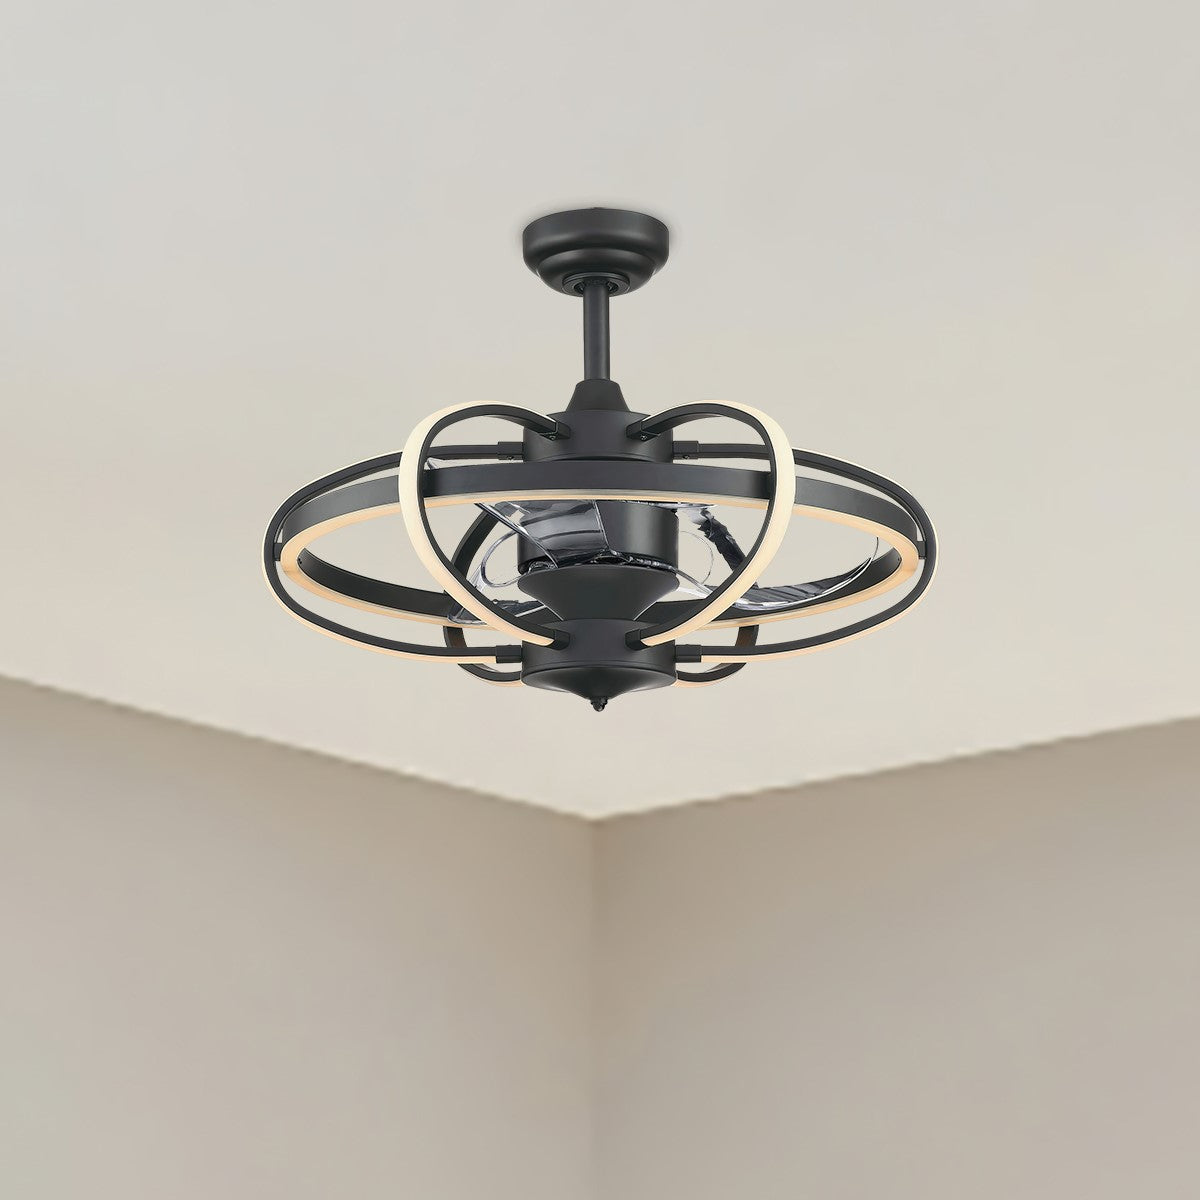 Obvi 22 Inch Modern Chandelier Ceiling Fan With Light And Remote